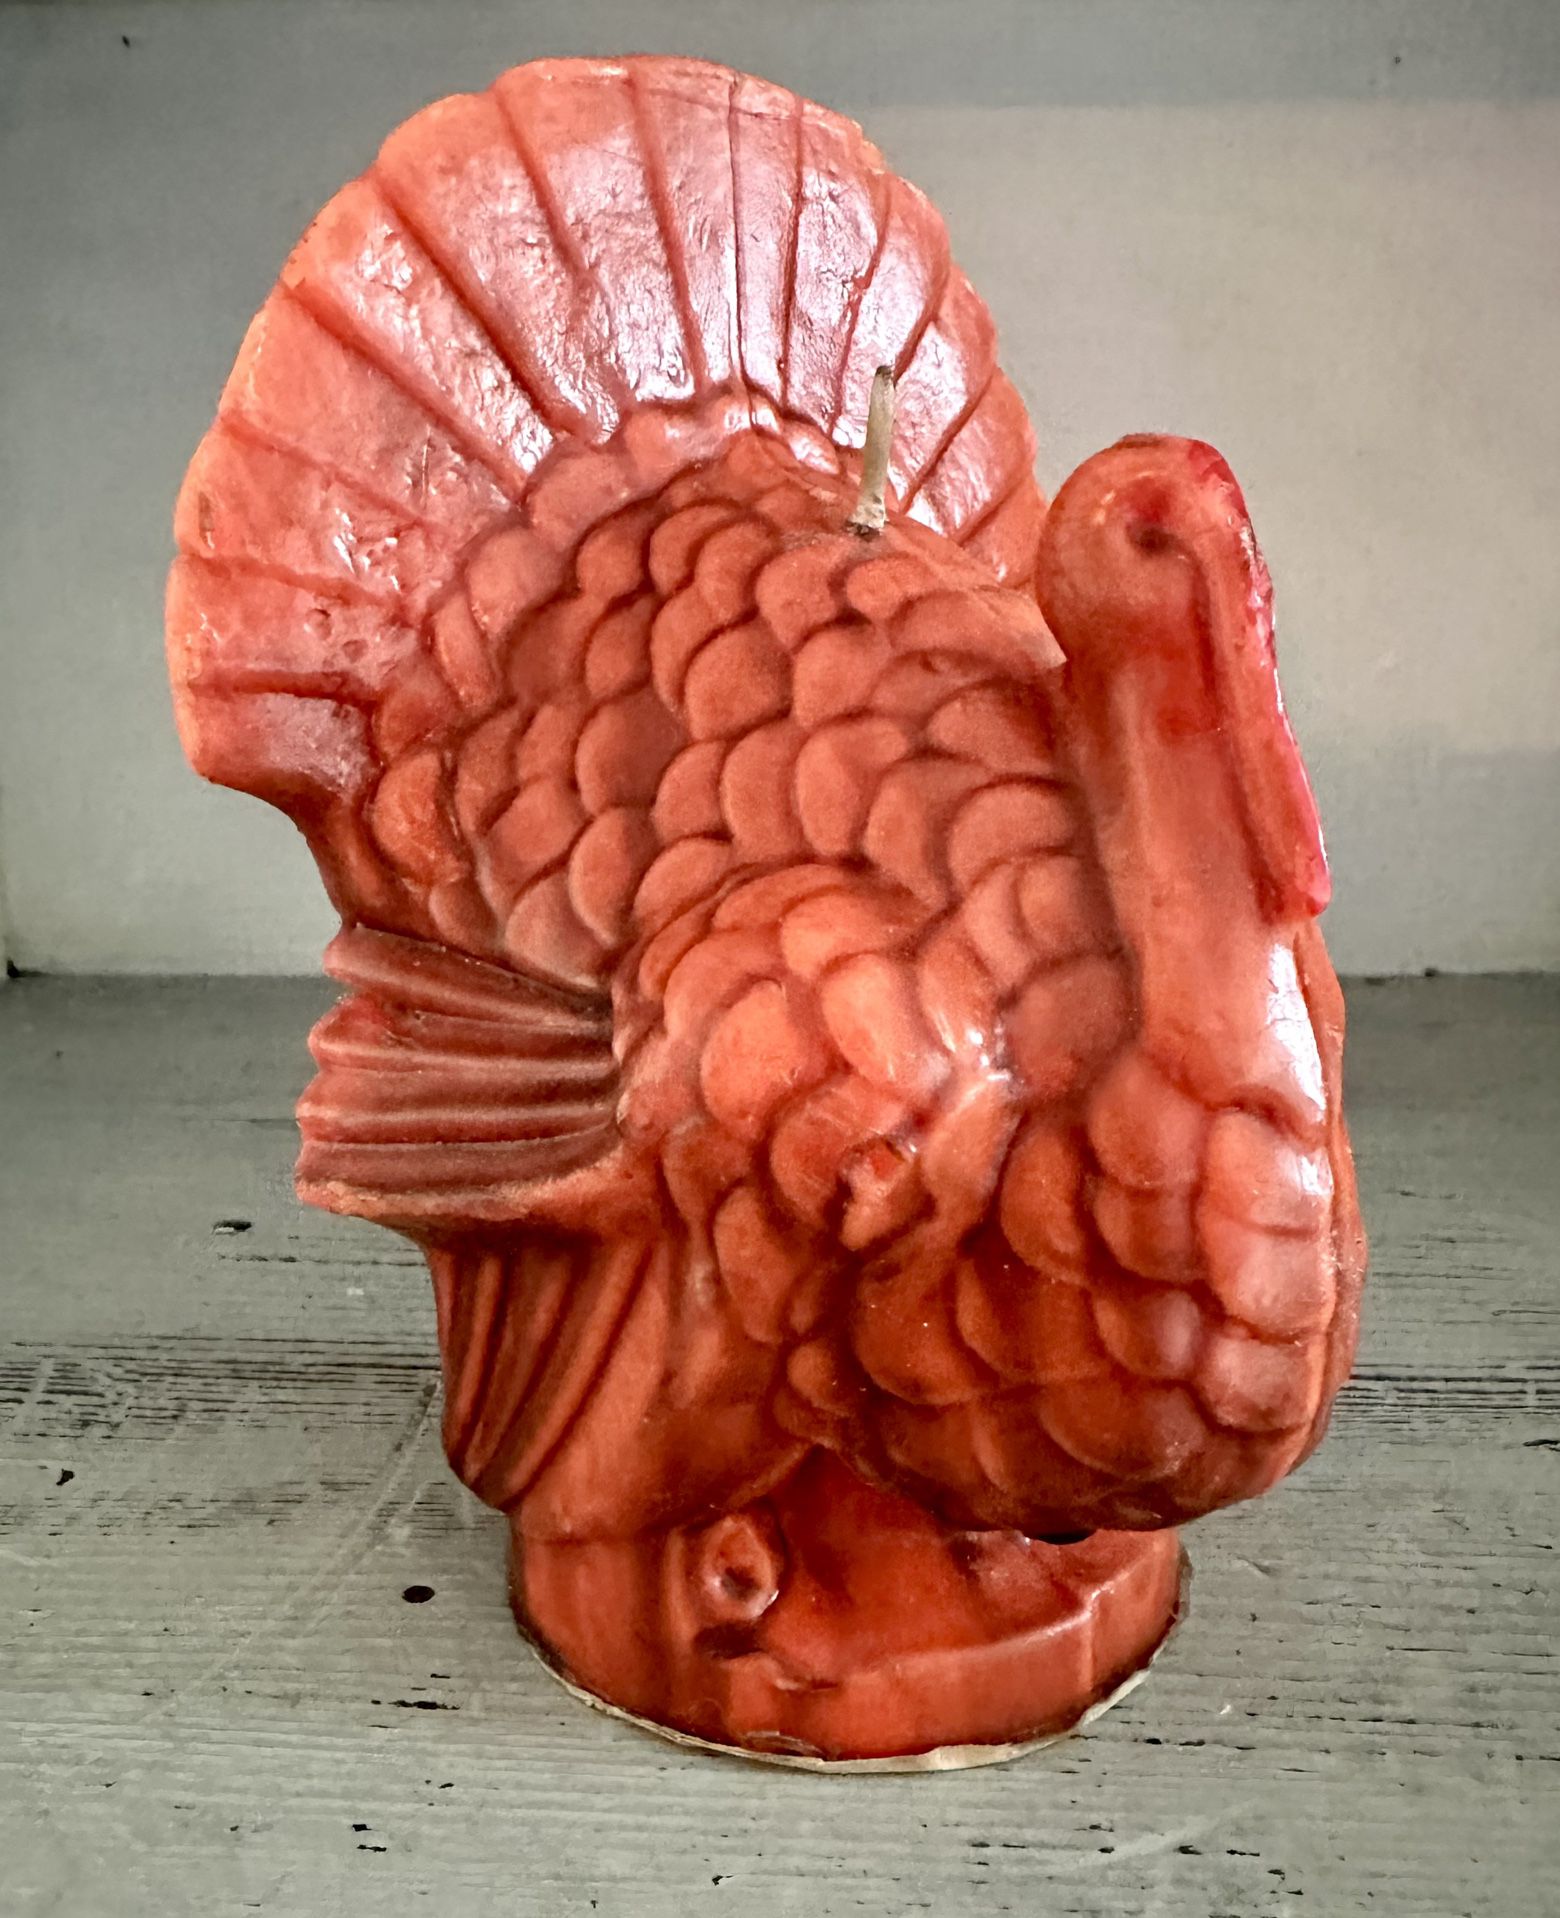 Large vintage Gurley turkey thanksgiving candle  6 1/2” tall x 4 3/4” wide  Good condition. Bright color. Has not been burned.   